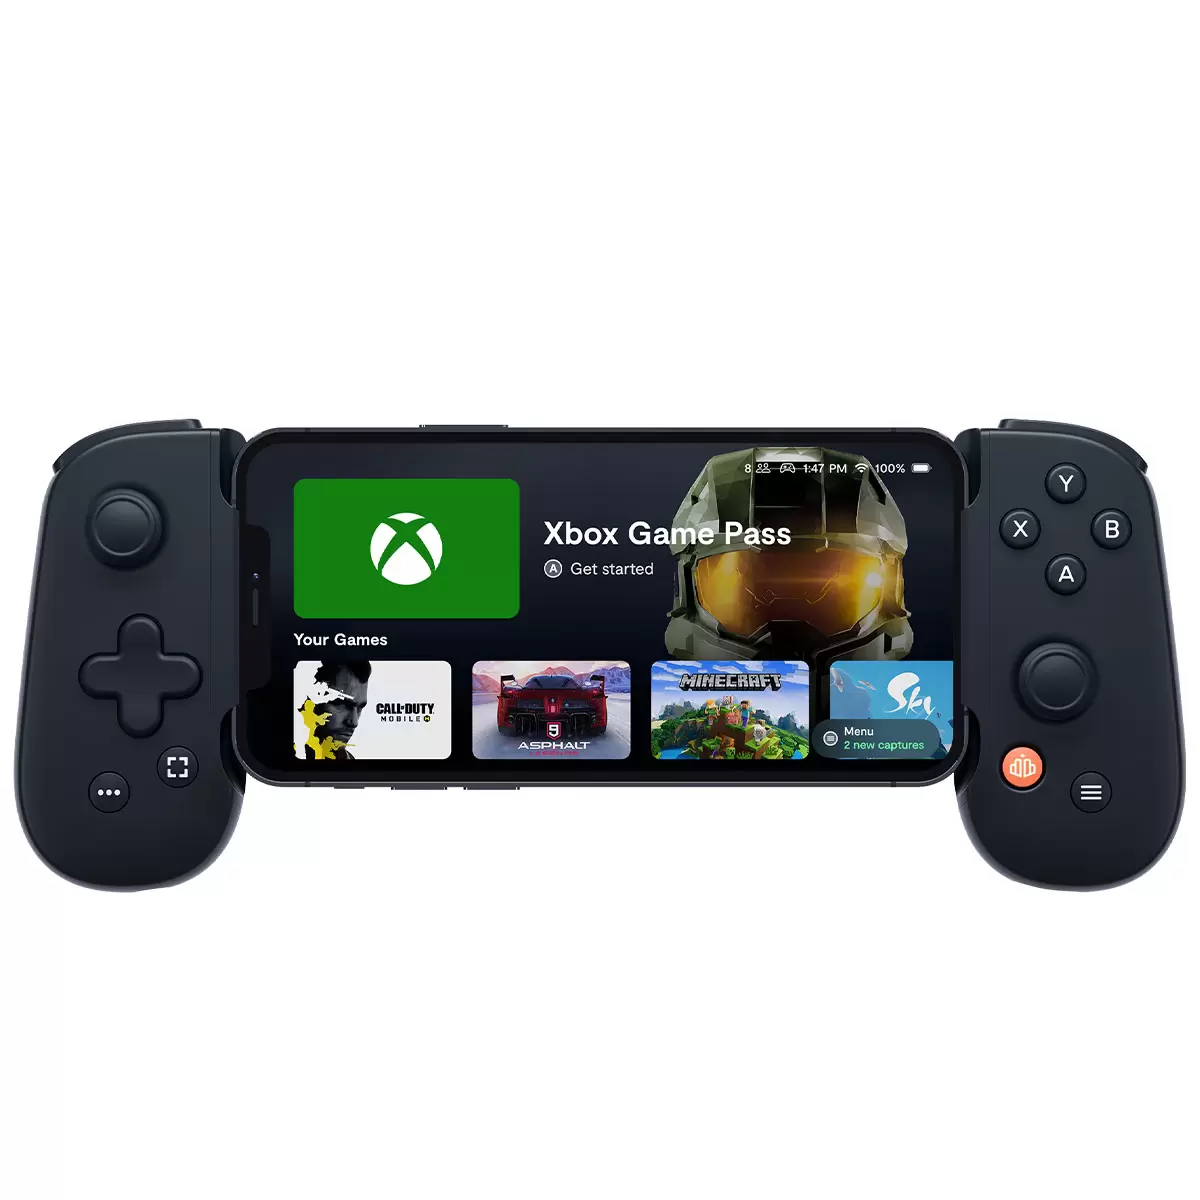 Backbone One Mobile Gaming Controller for iPhone